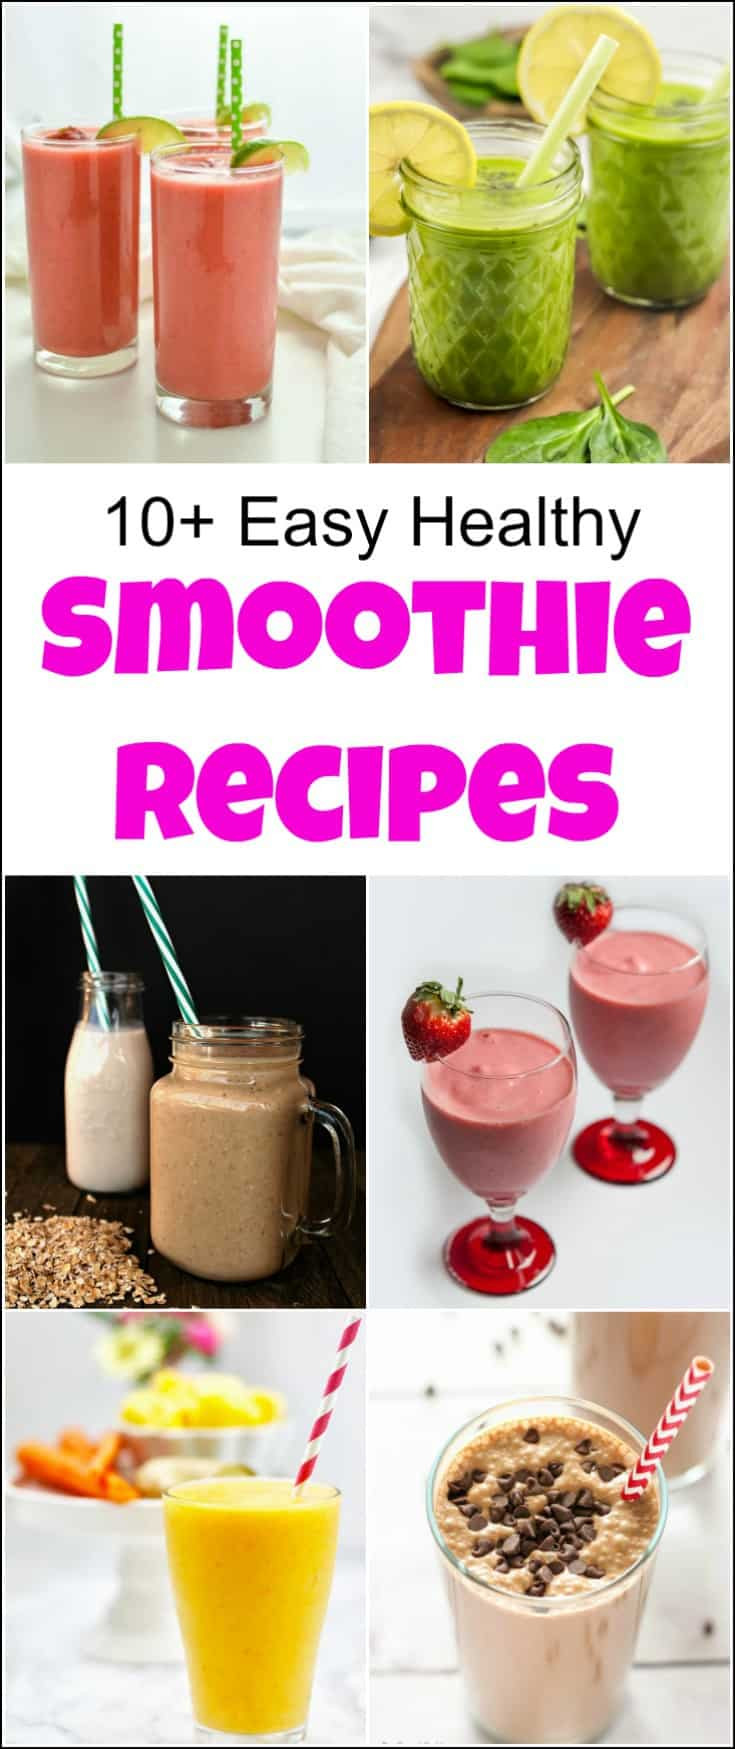 Simple Healthy Smoothie Recipes
 10 Easy Healthy Smoothie Recipes Your Whole Family Will Love